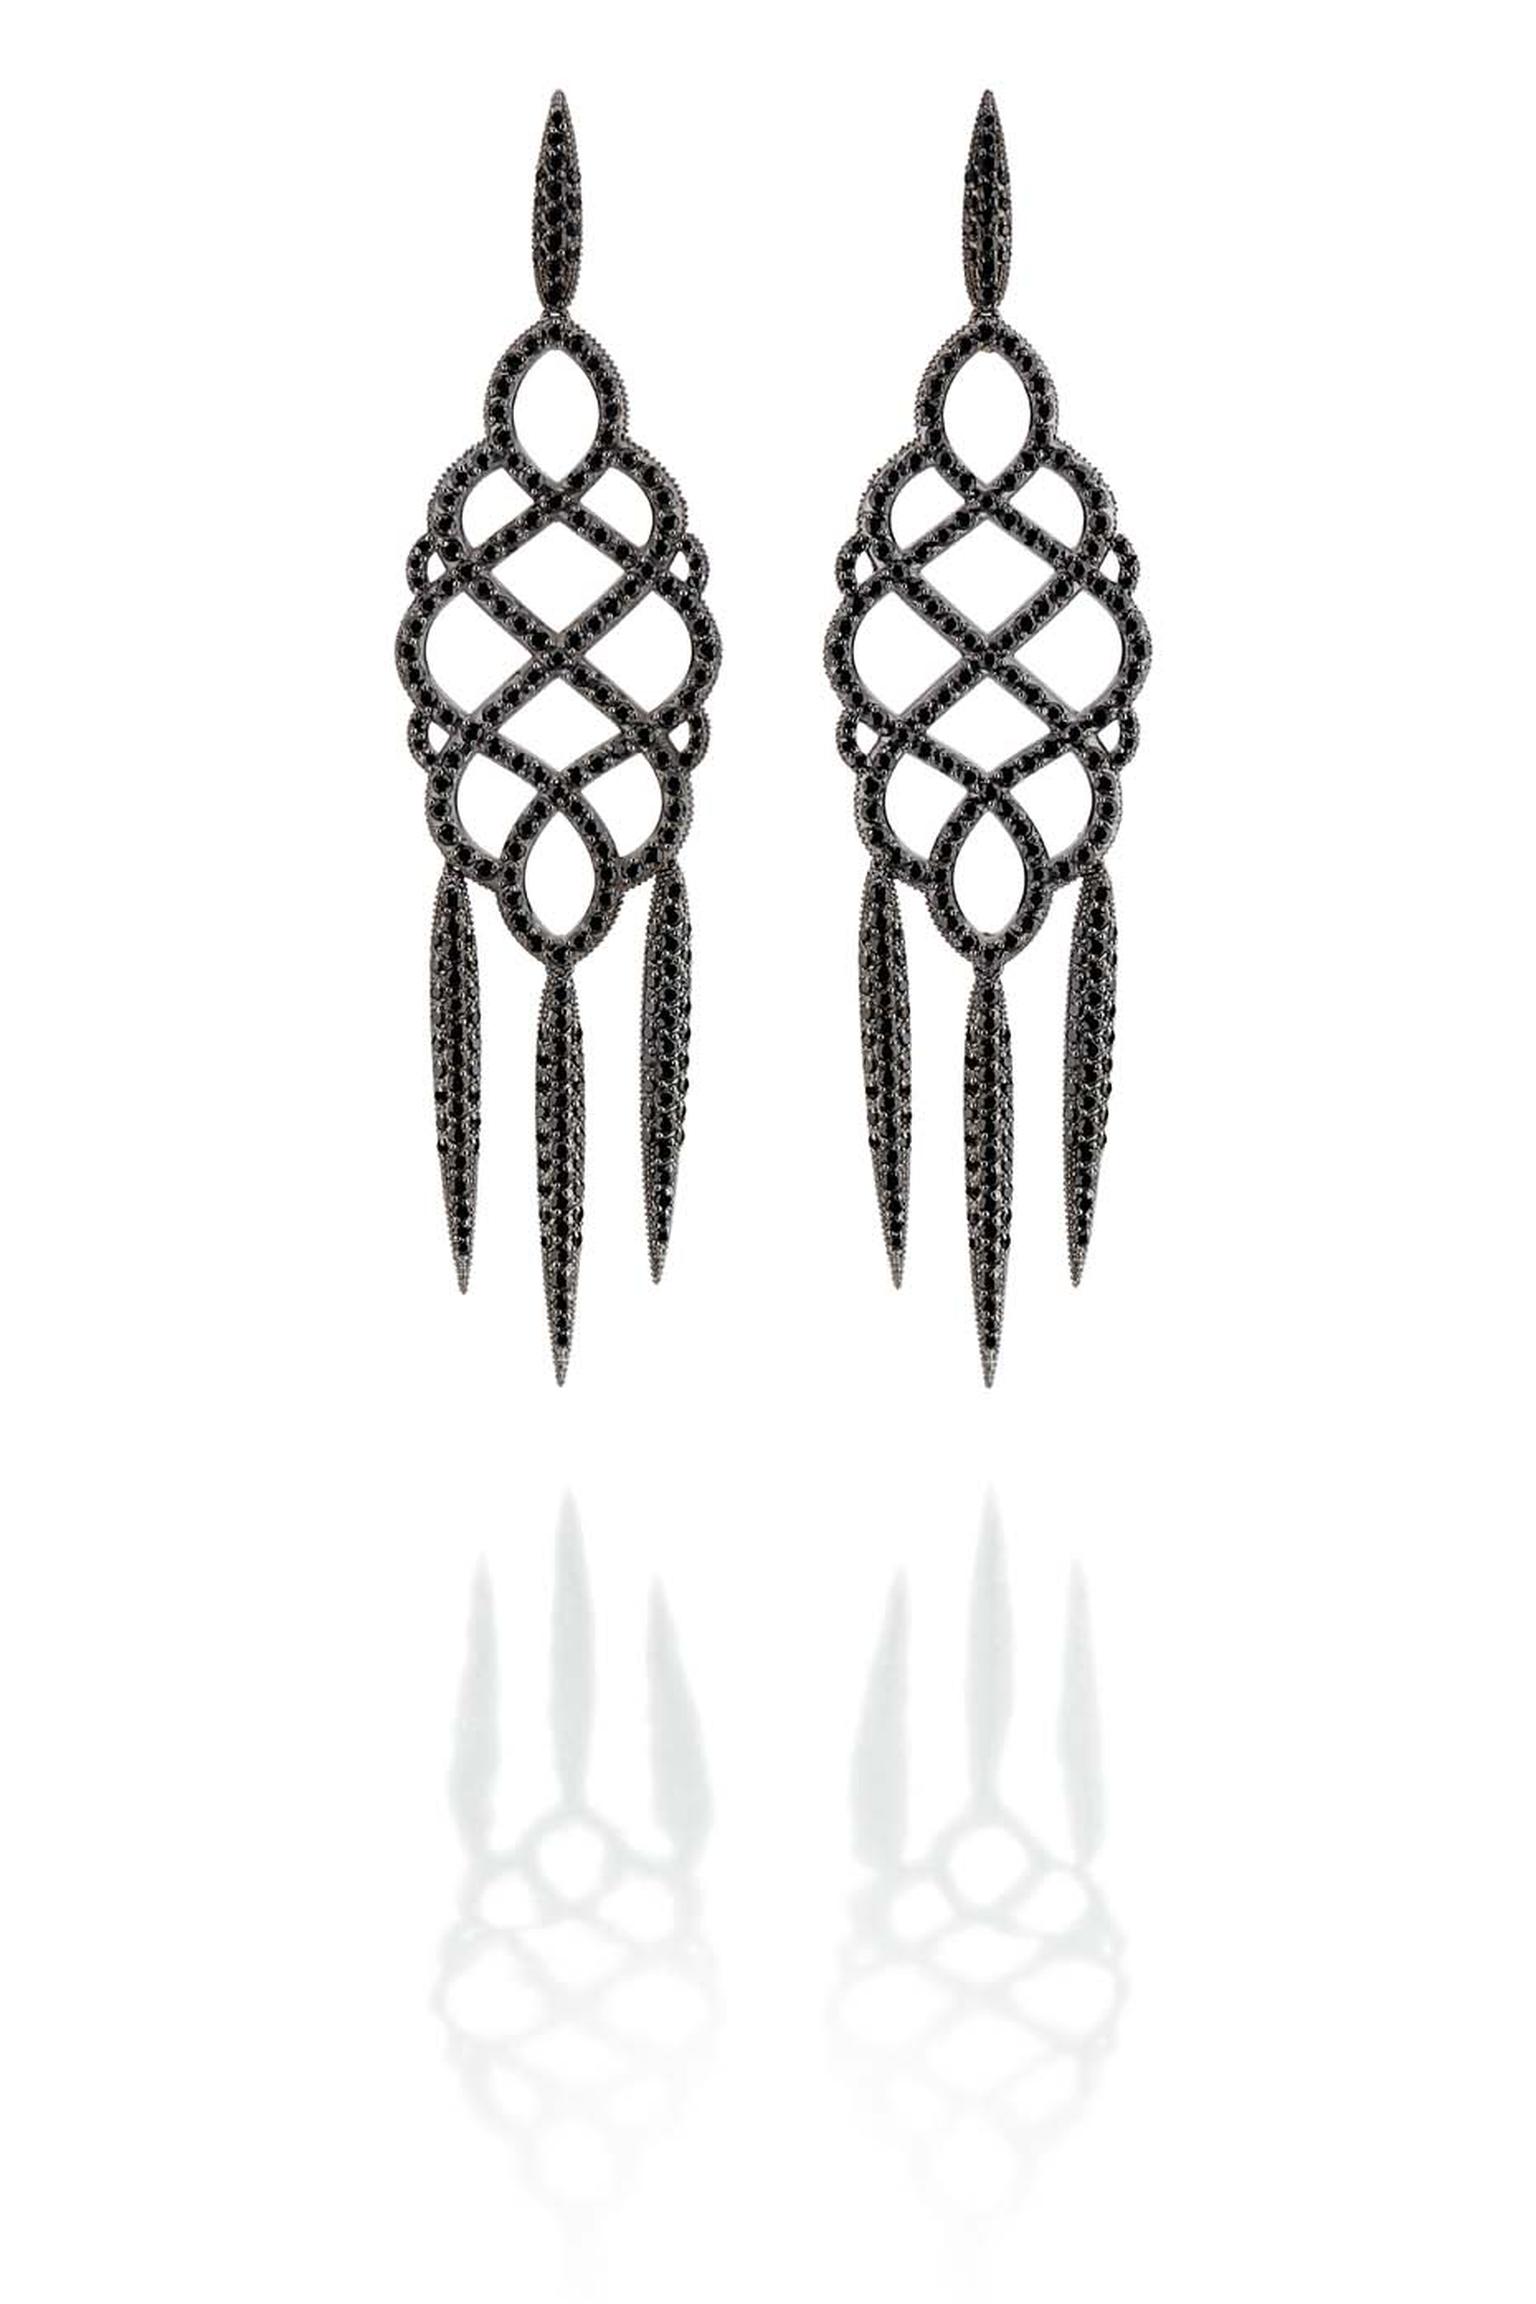 Carla Amorim Russia Collection Hermitage earrings in blackened gold and black diamonds, inspired by the Hermitage museum in Saint Petersburg